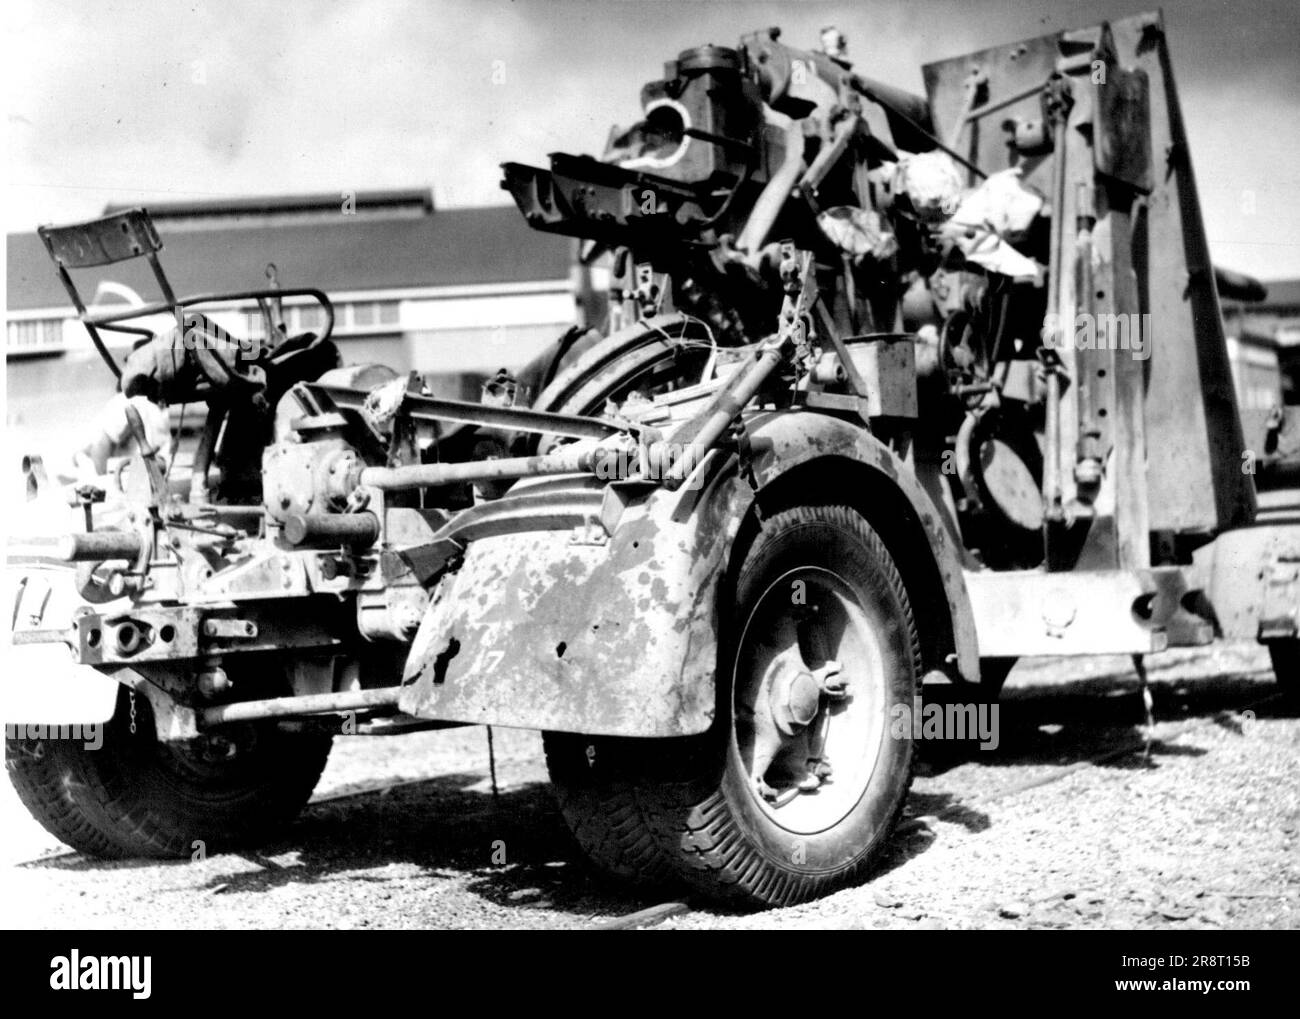 Bullet holes punched in its mudguard, this German 88 mm gun now sits forlornly in an Australian street after rolling triumphantly down the Western Desert to El Alamein where it was captured by men of the Ninth Division. March 8, 1943. Stock Photo